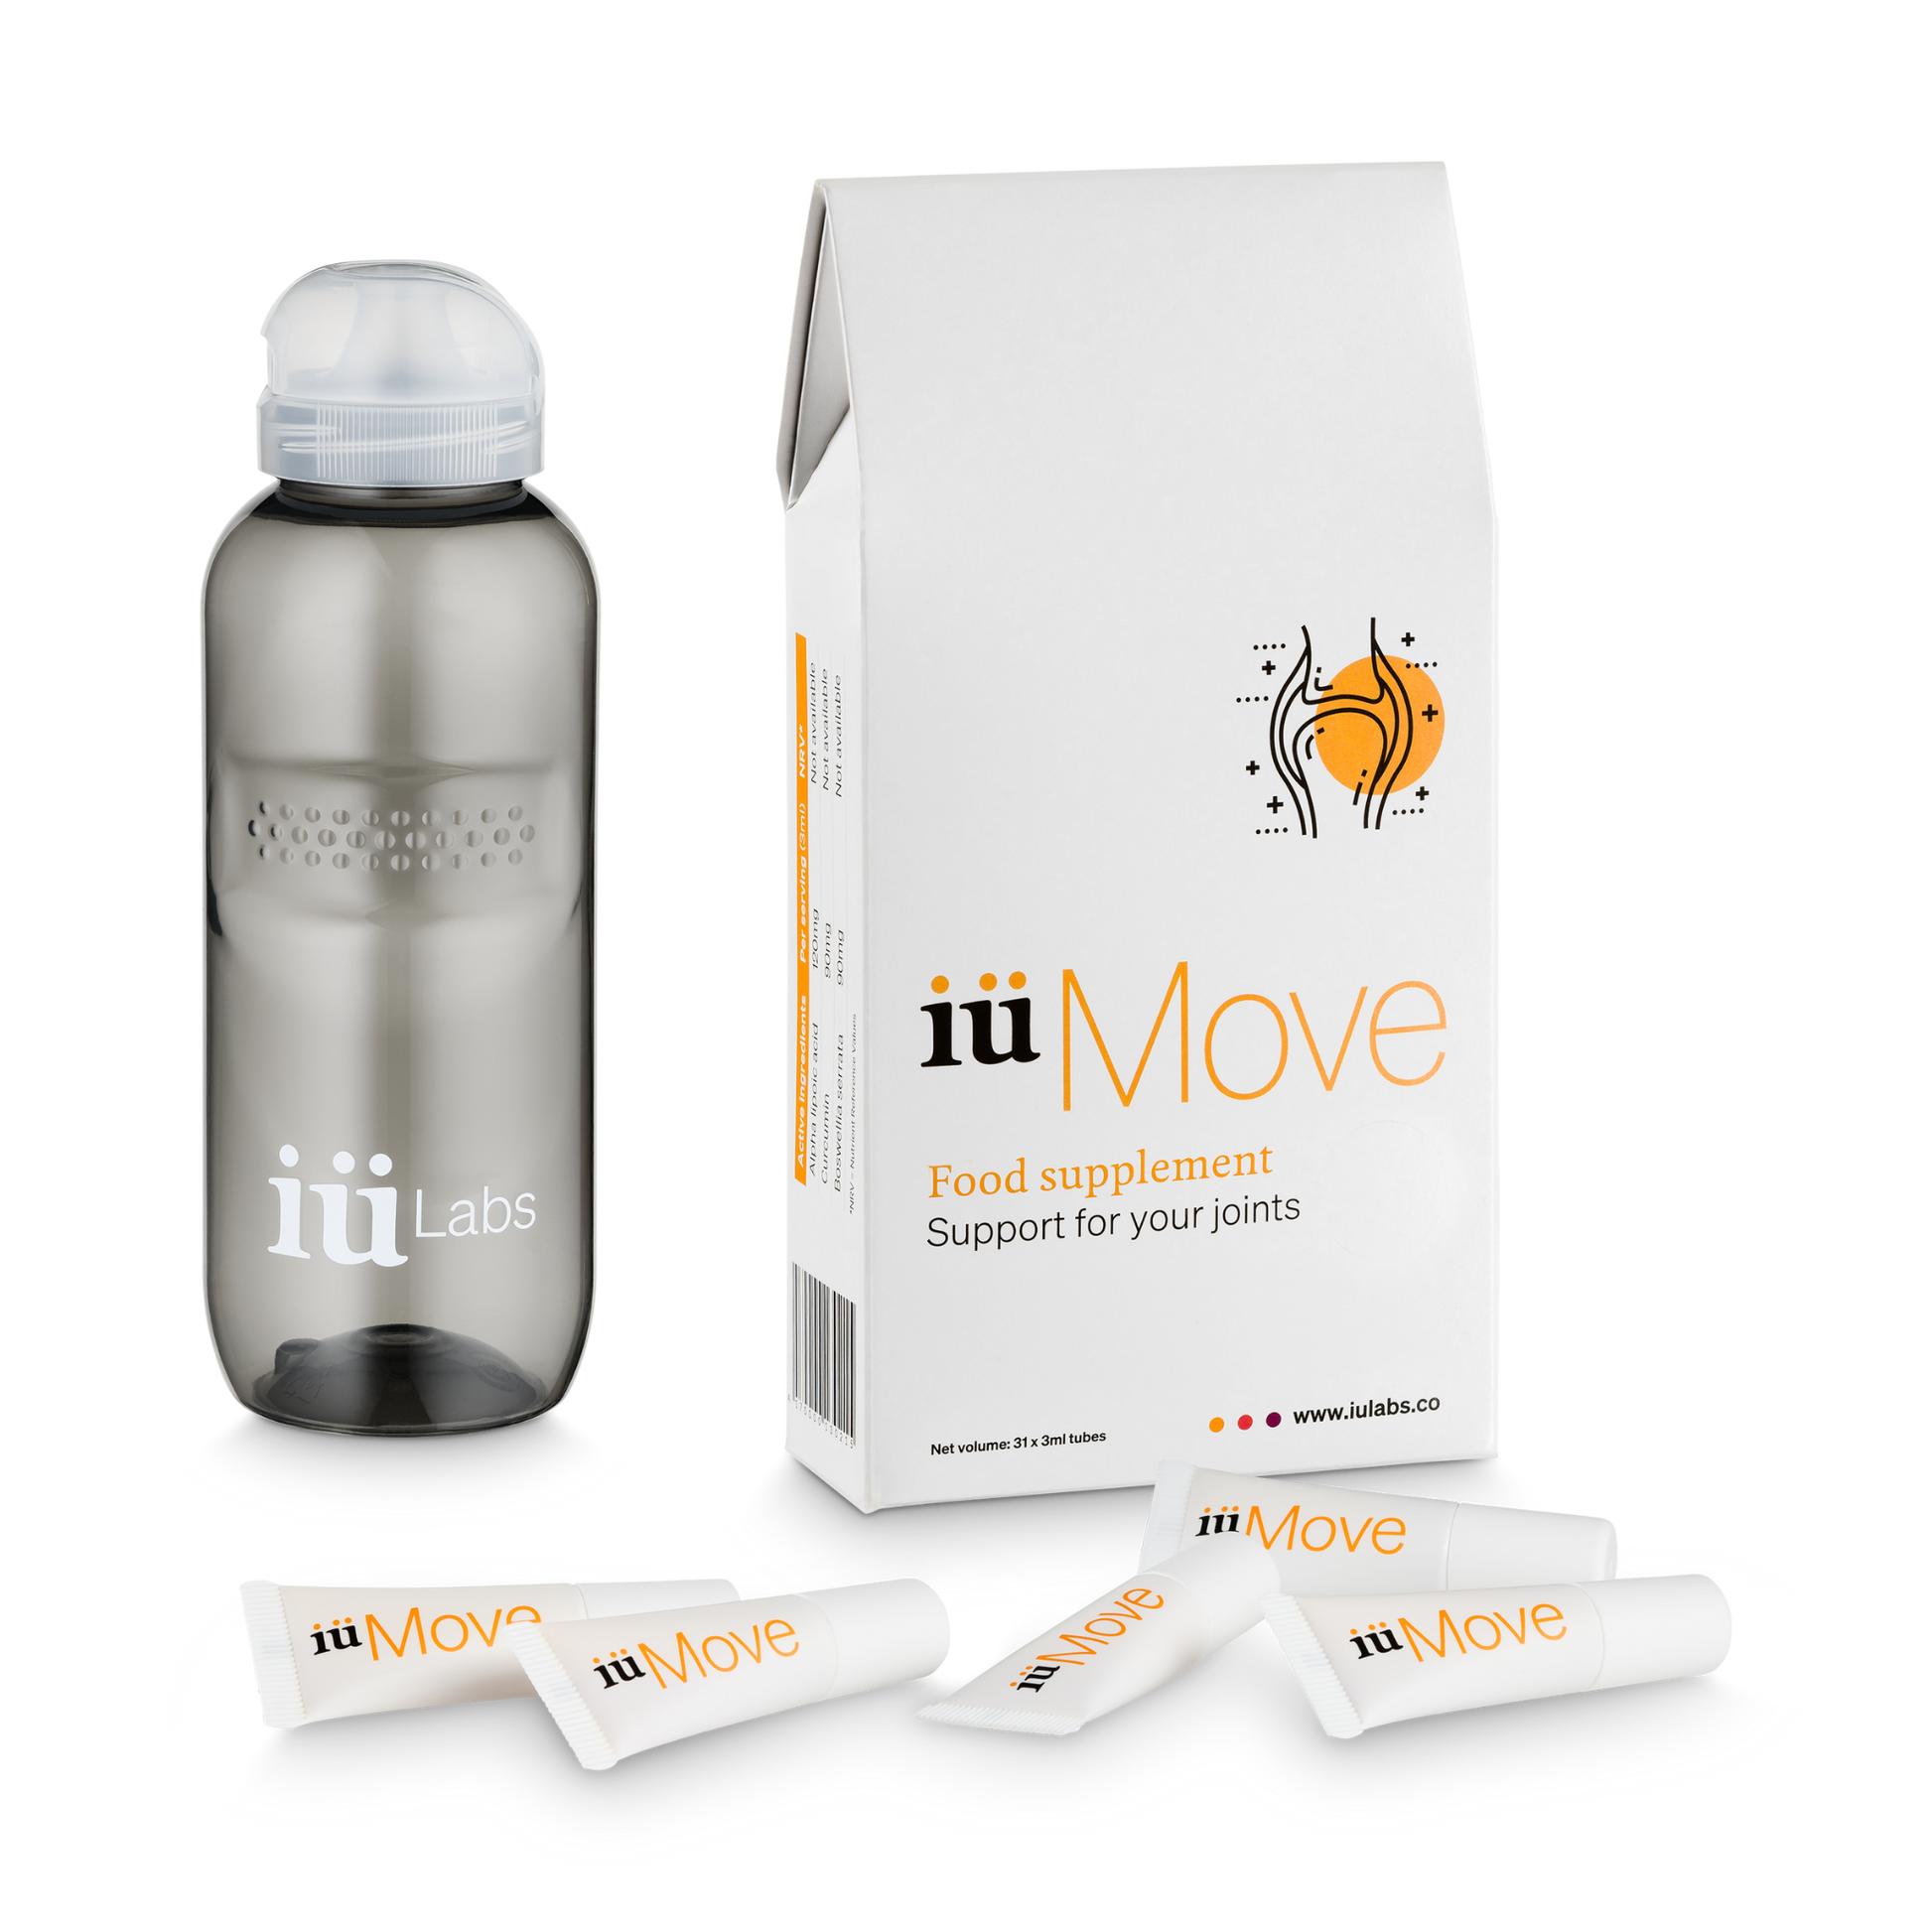 One month pack of iüMove joint health supplement from iüLabs, joint health support supplement, tubes and package, and water bottle, iuMove, iuLabs